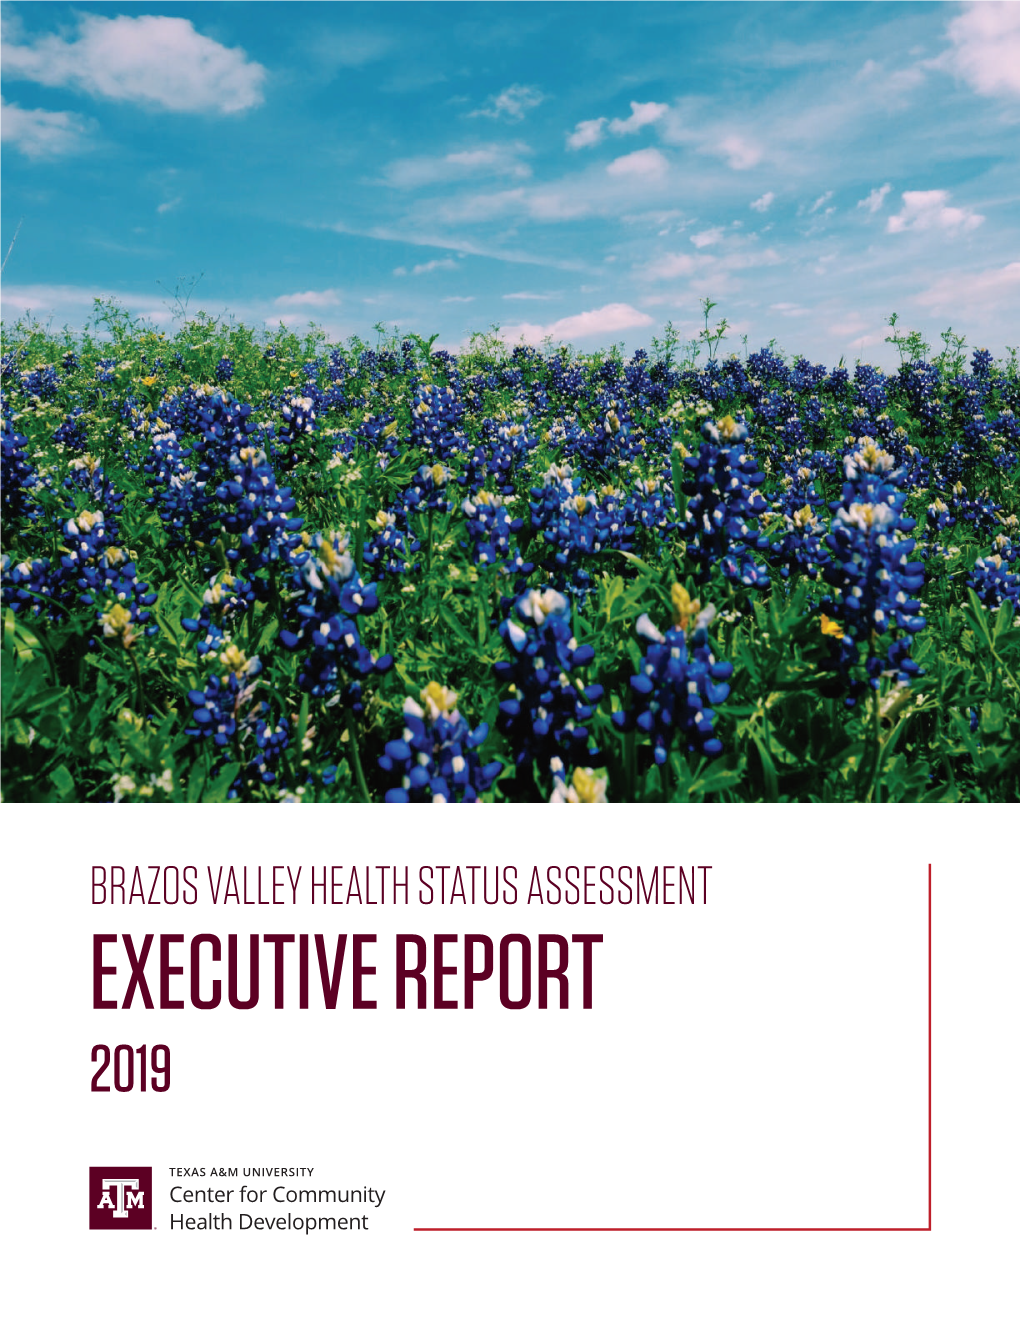 2019 Brazos Valley Health Assessment Report